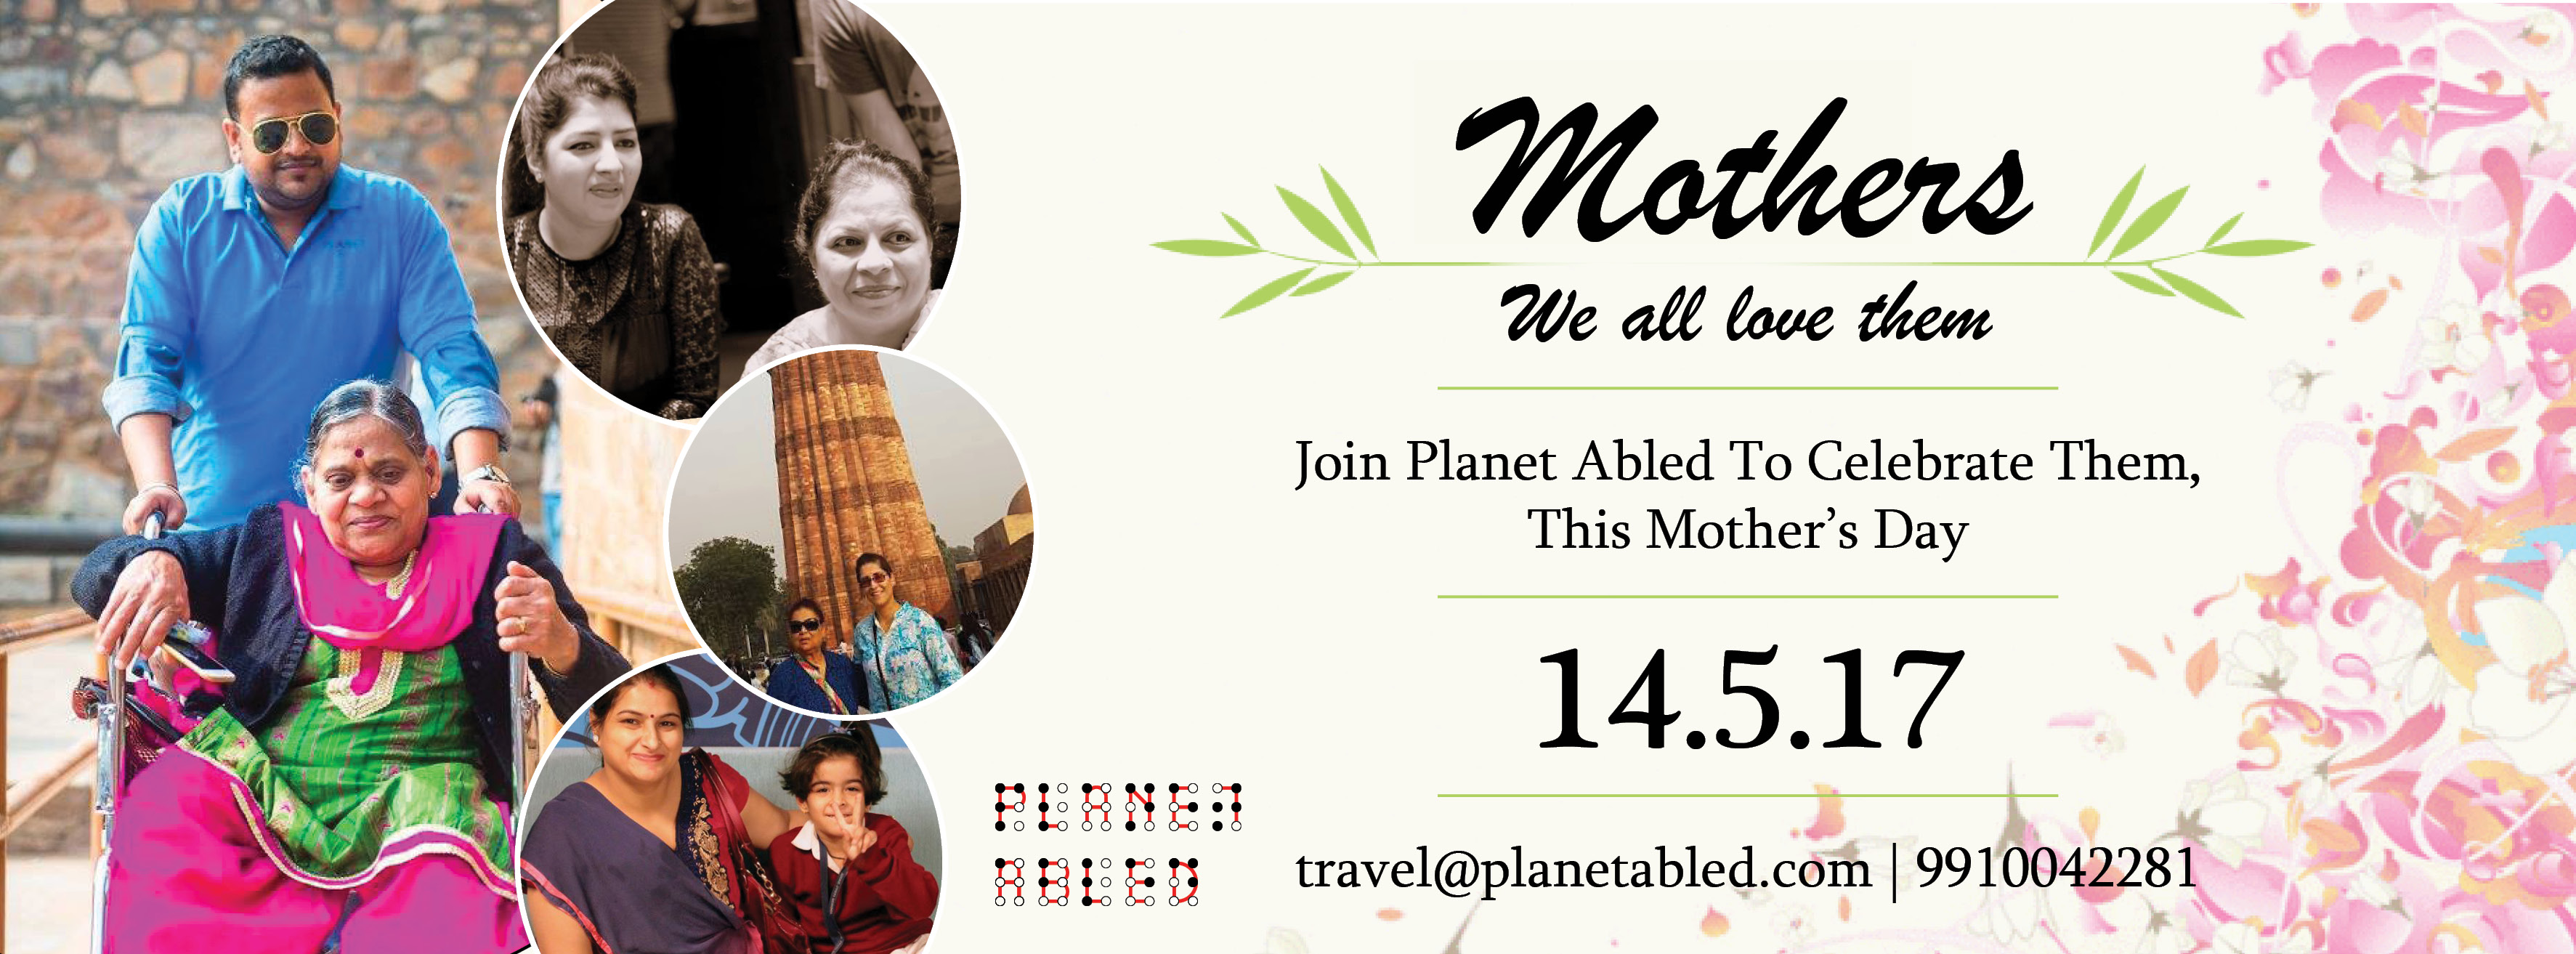 Planet Abled Mother's Day Celebration